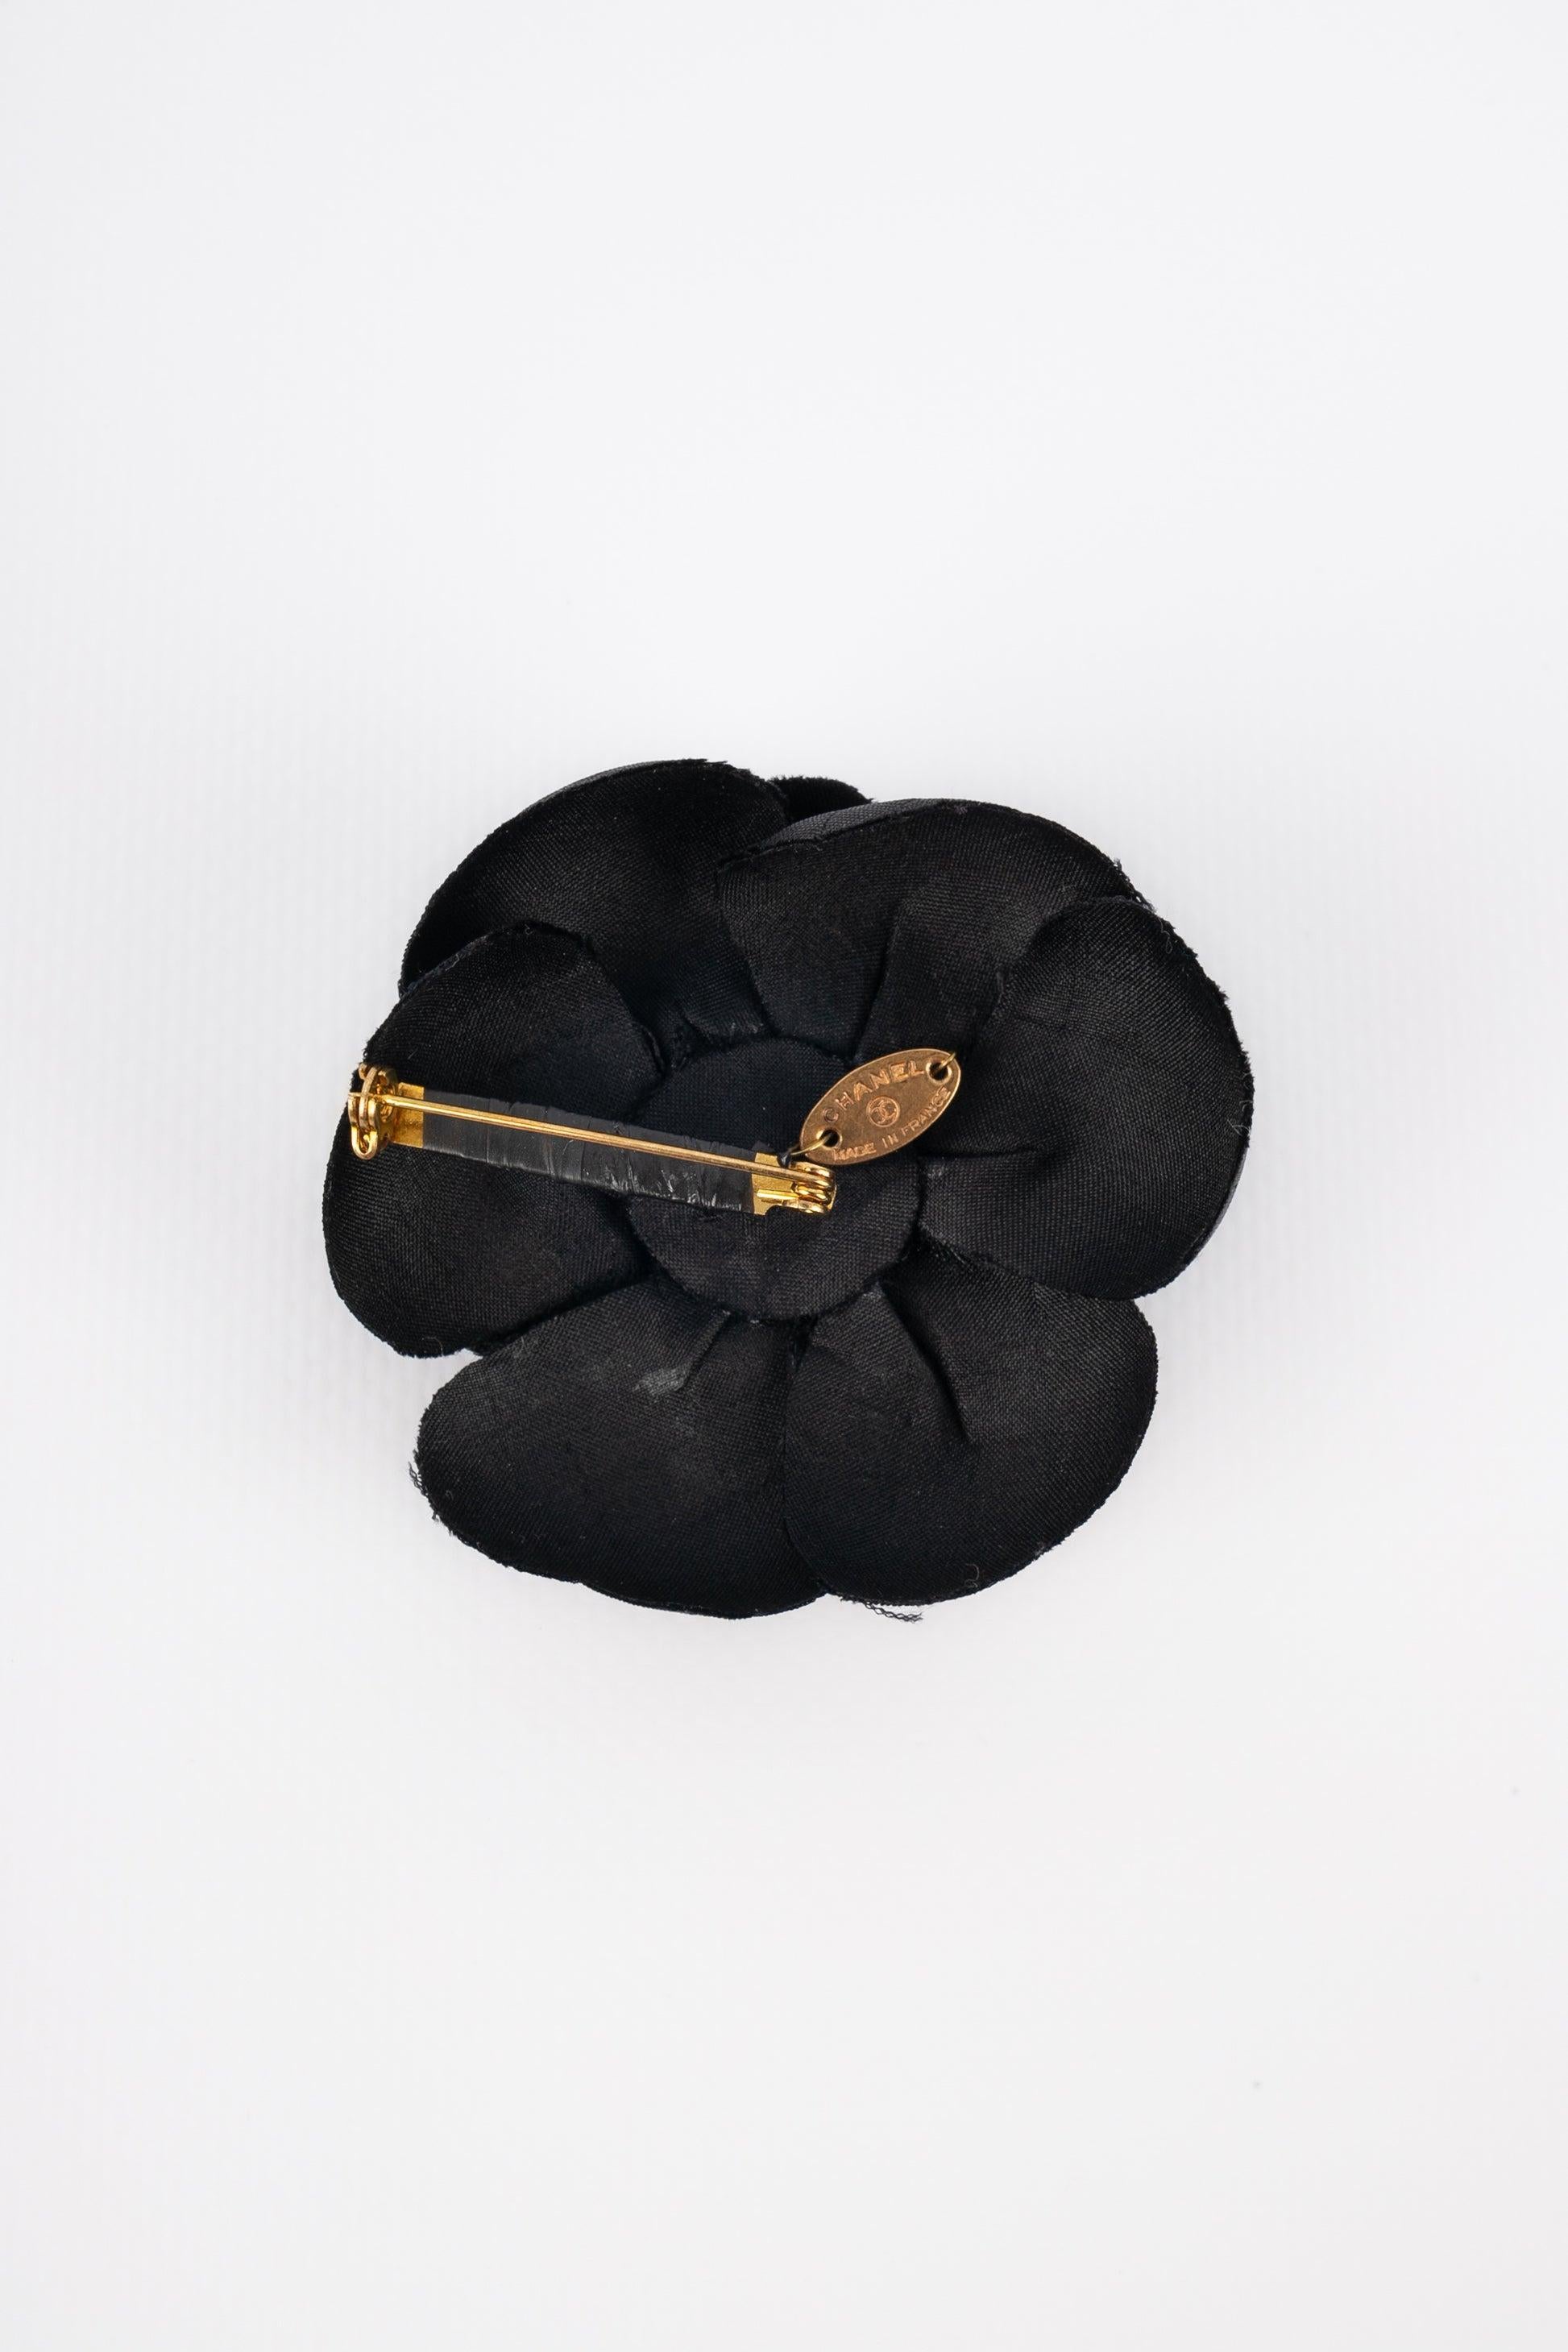 Women's Chanel Black Woven Fabric Camellia Brooch For Sale